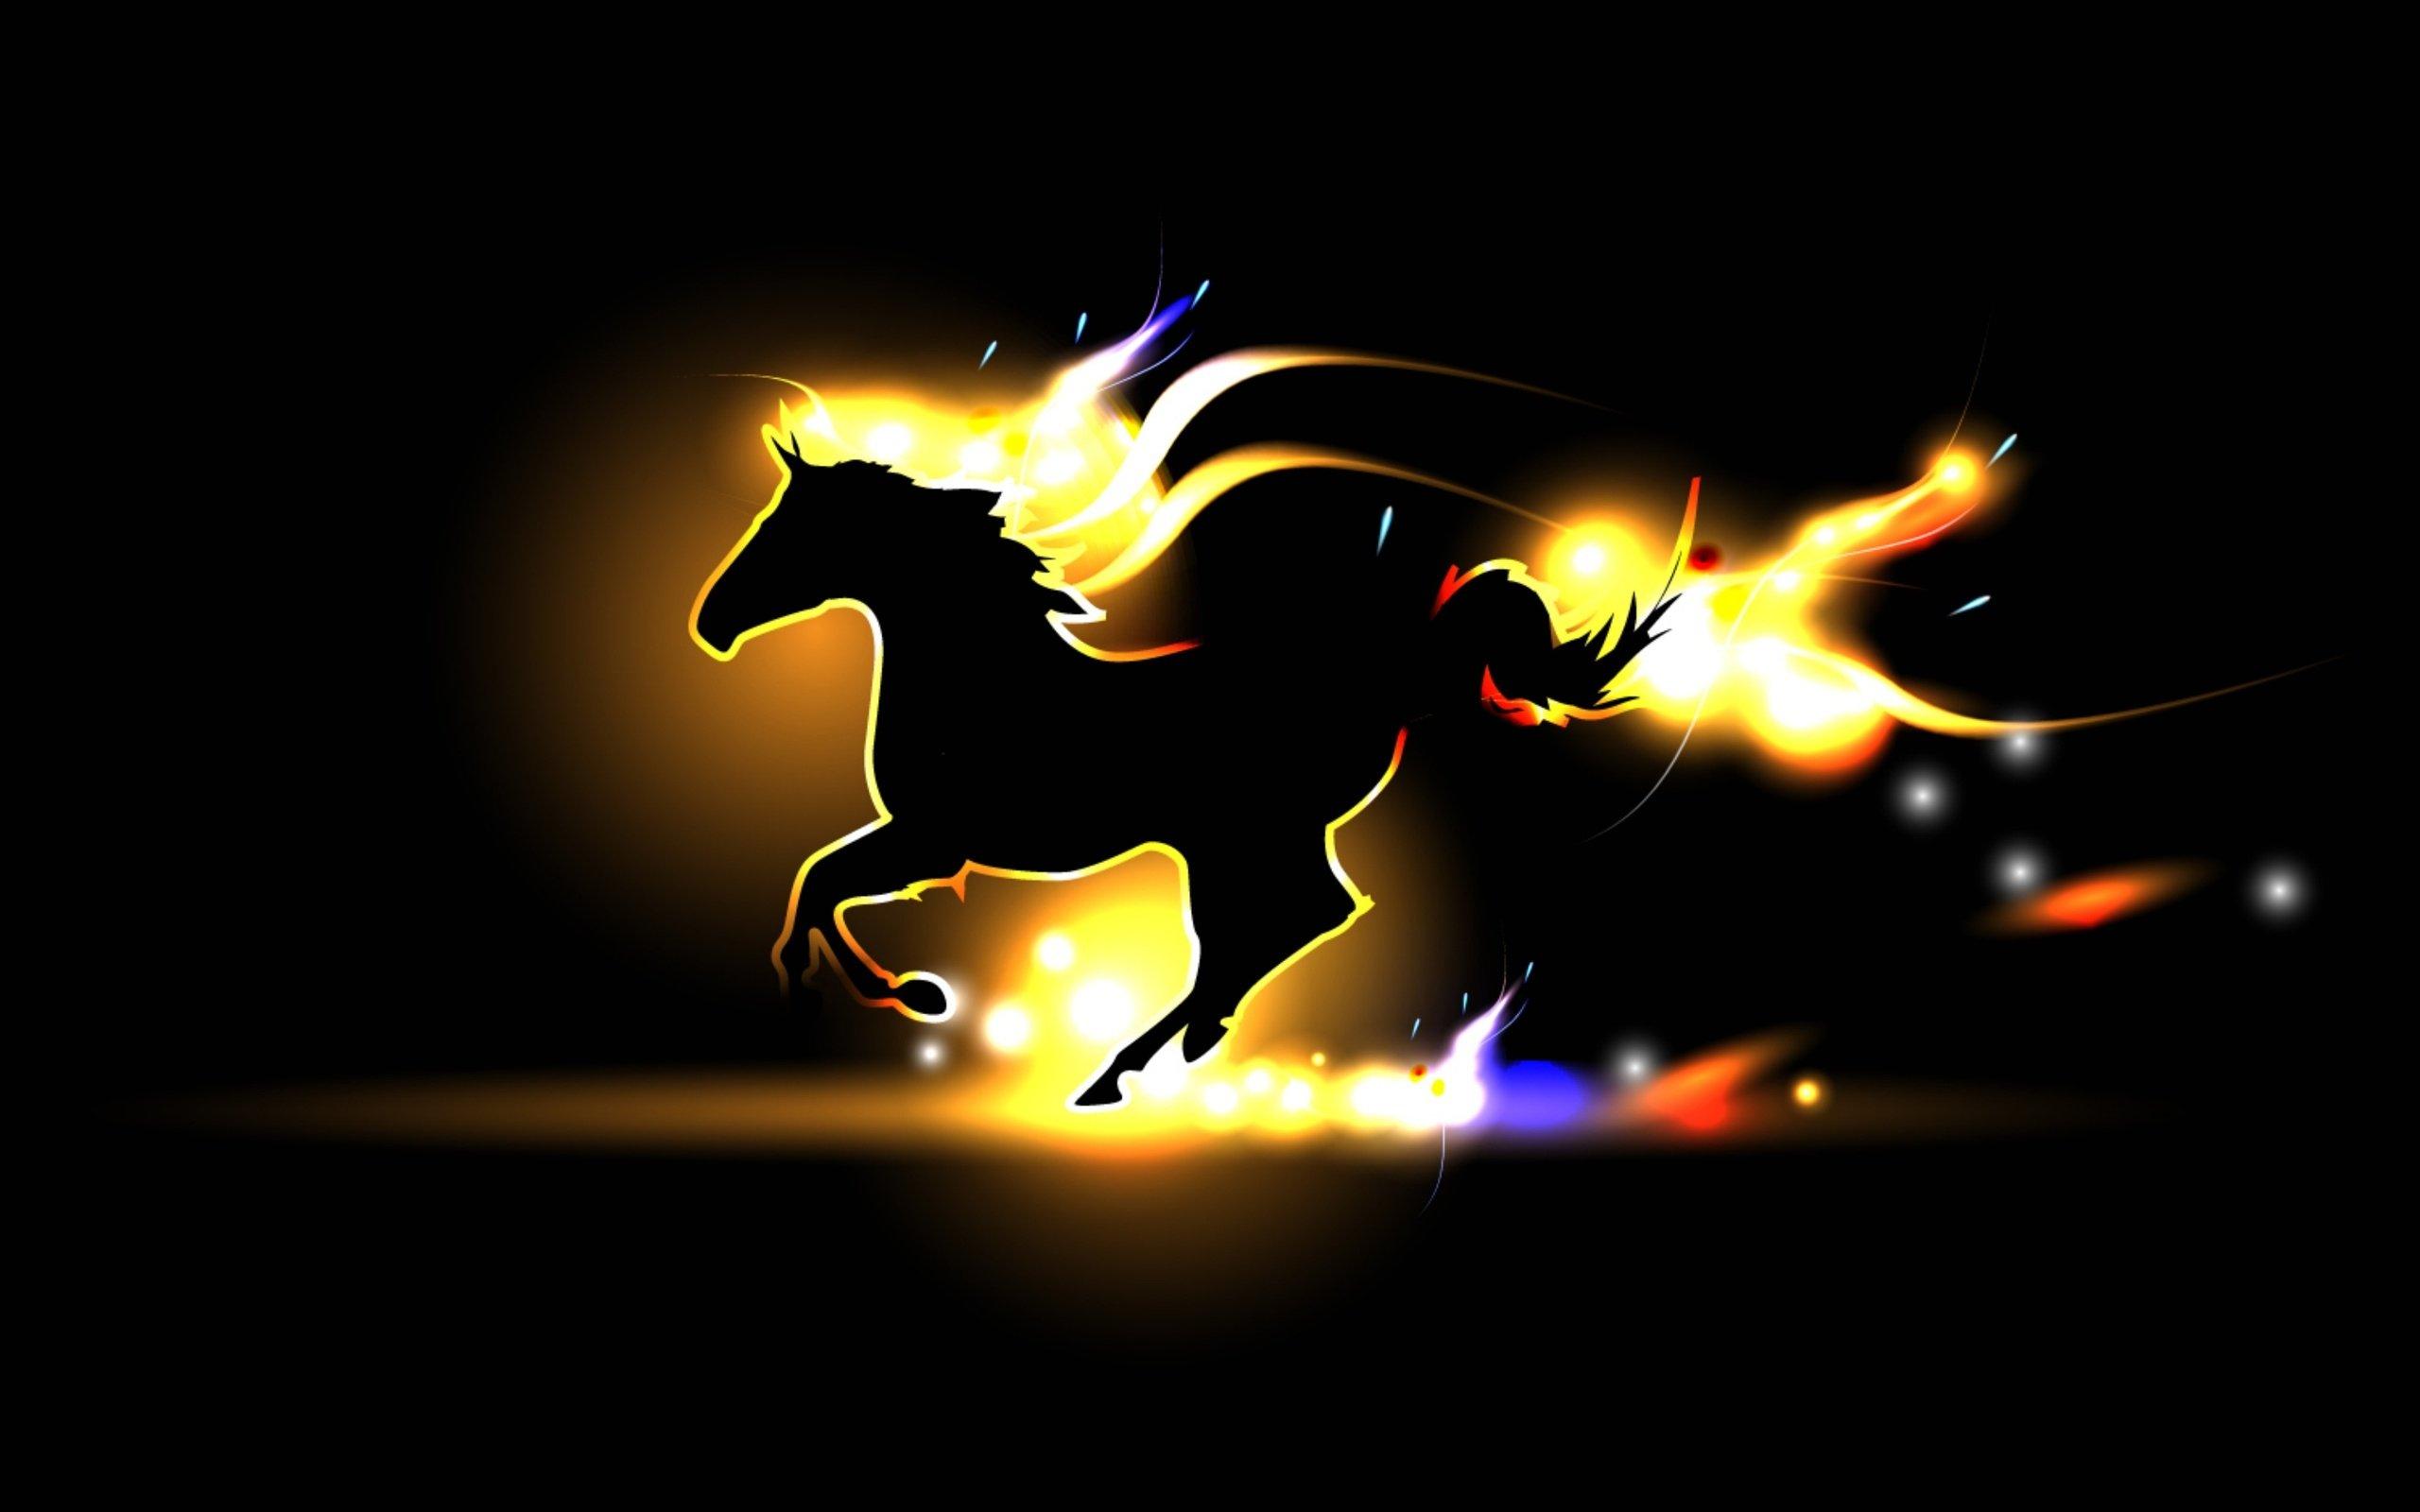 Horse gait flame fire GRIVA silhouette wallpaperx1600